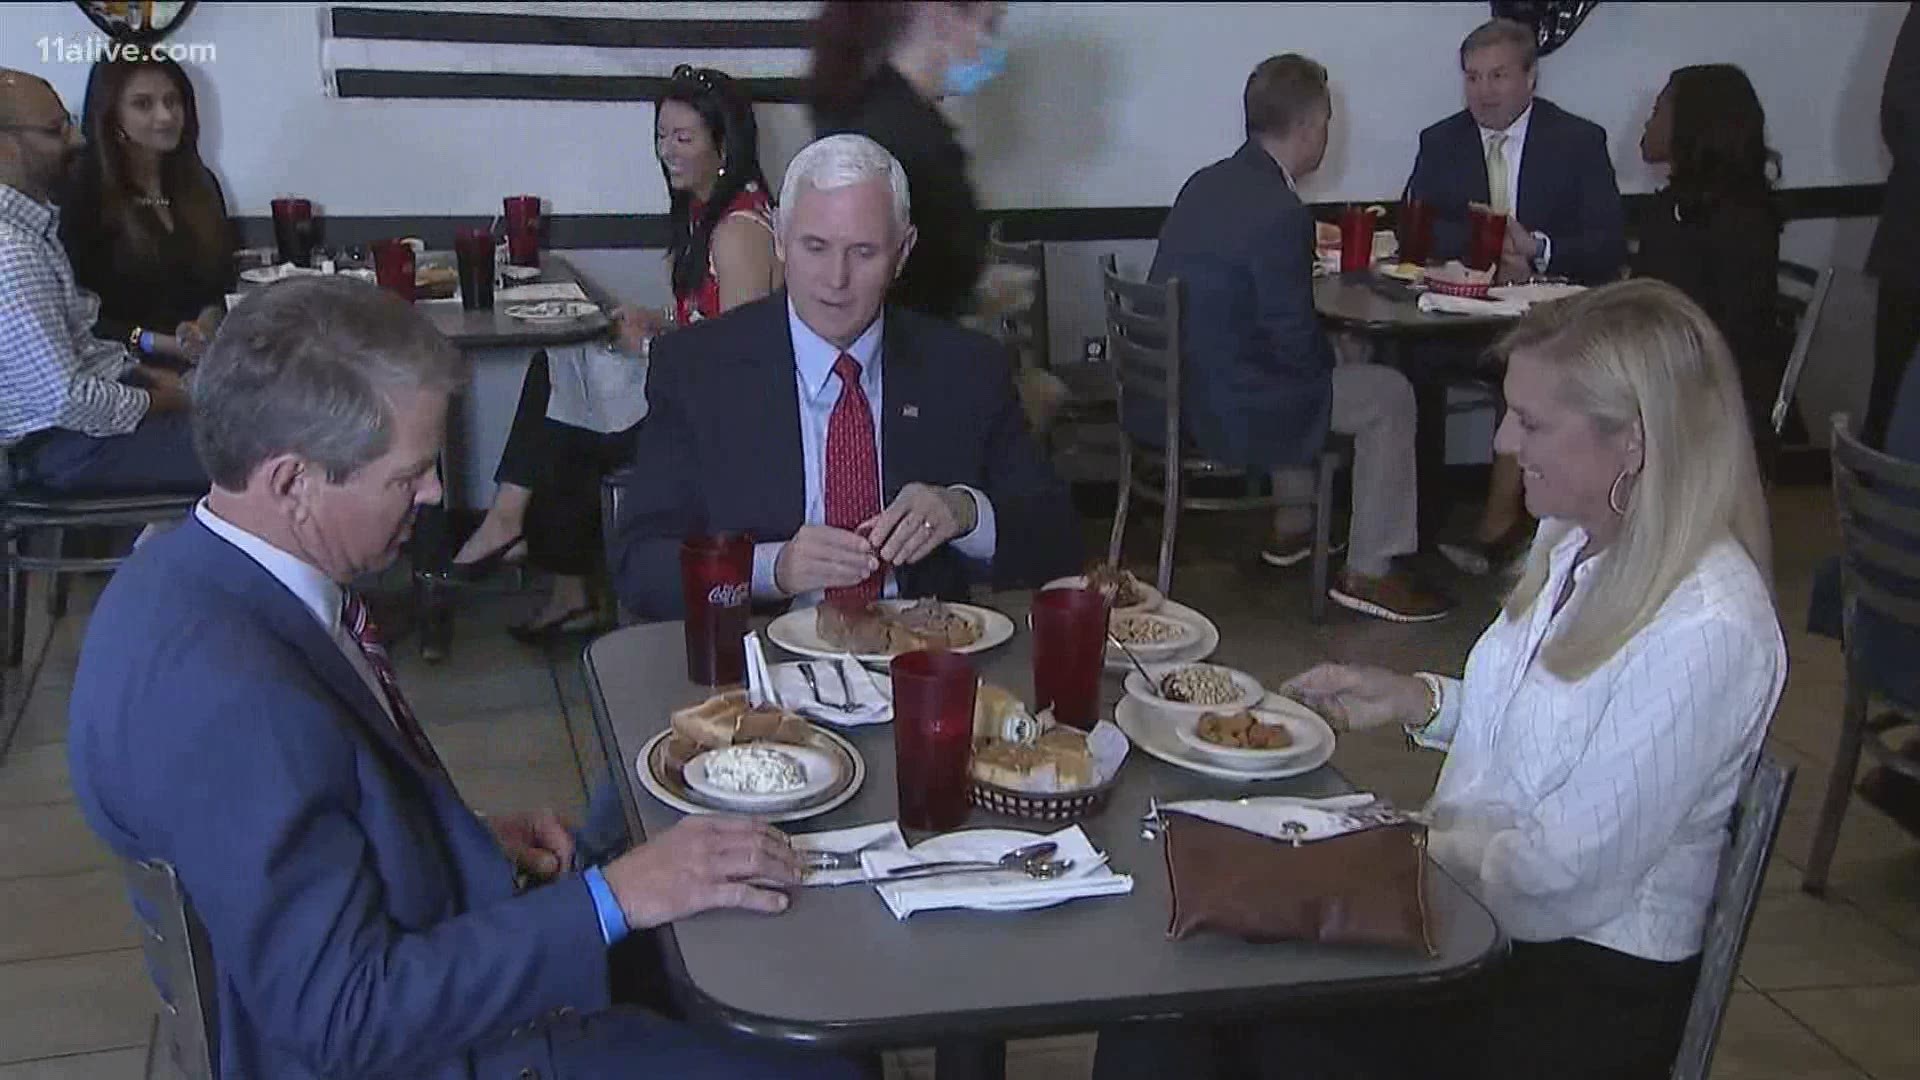 The Vice President sat at a table in the middle, along with the governor and Georgia's first lady. Other patrons were kept at least six feet away.